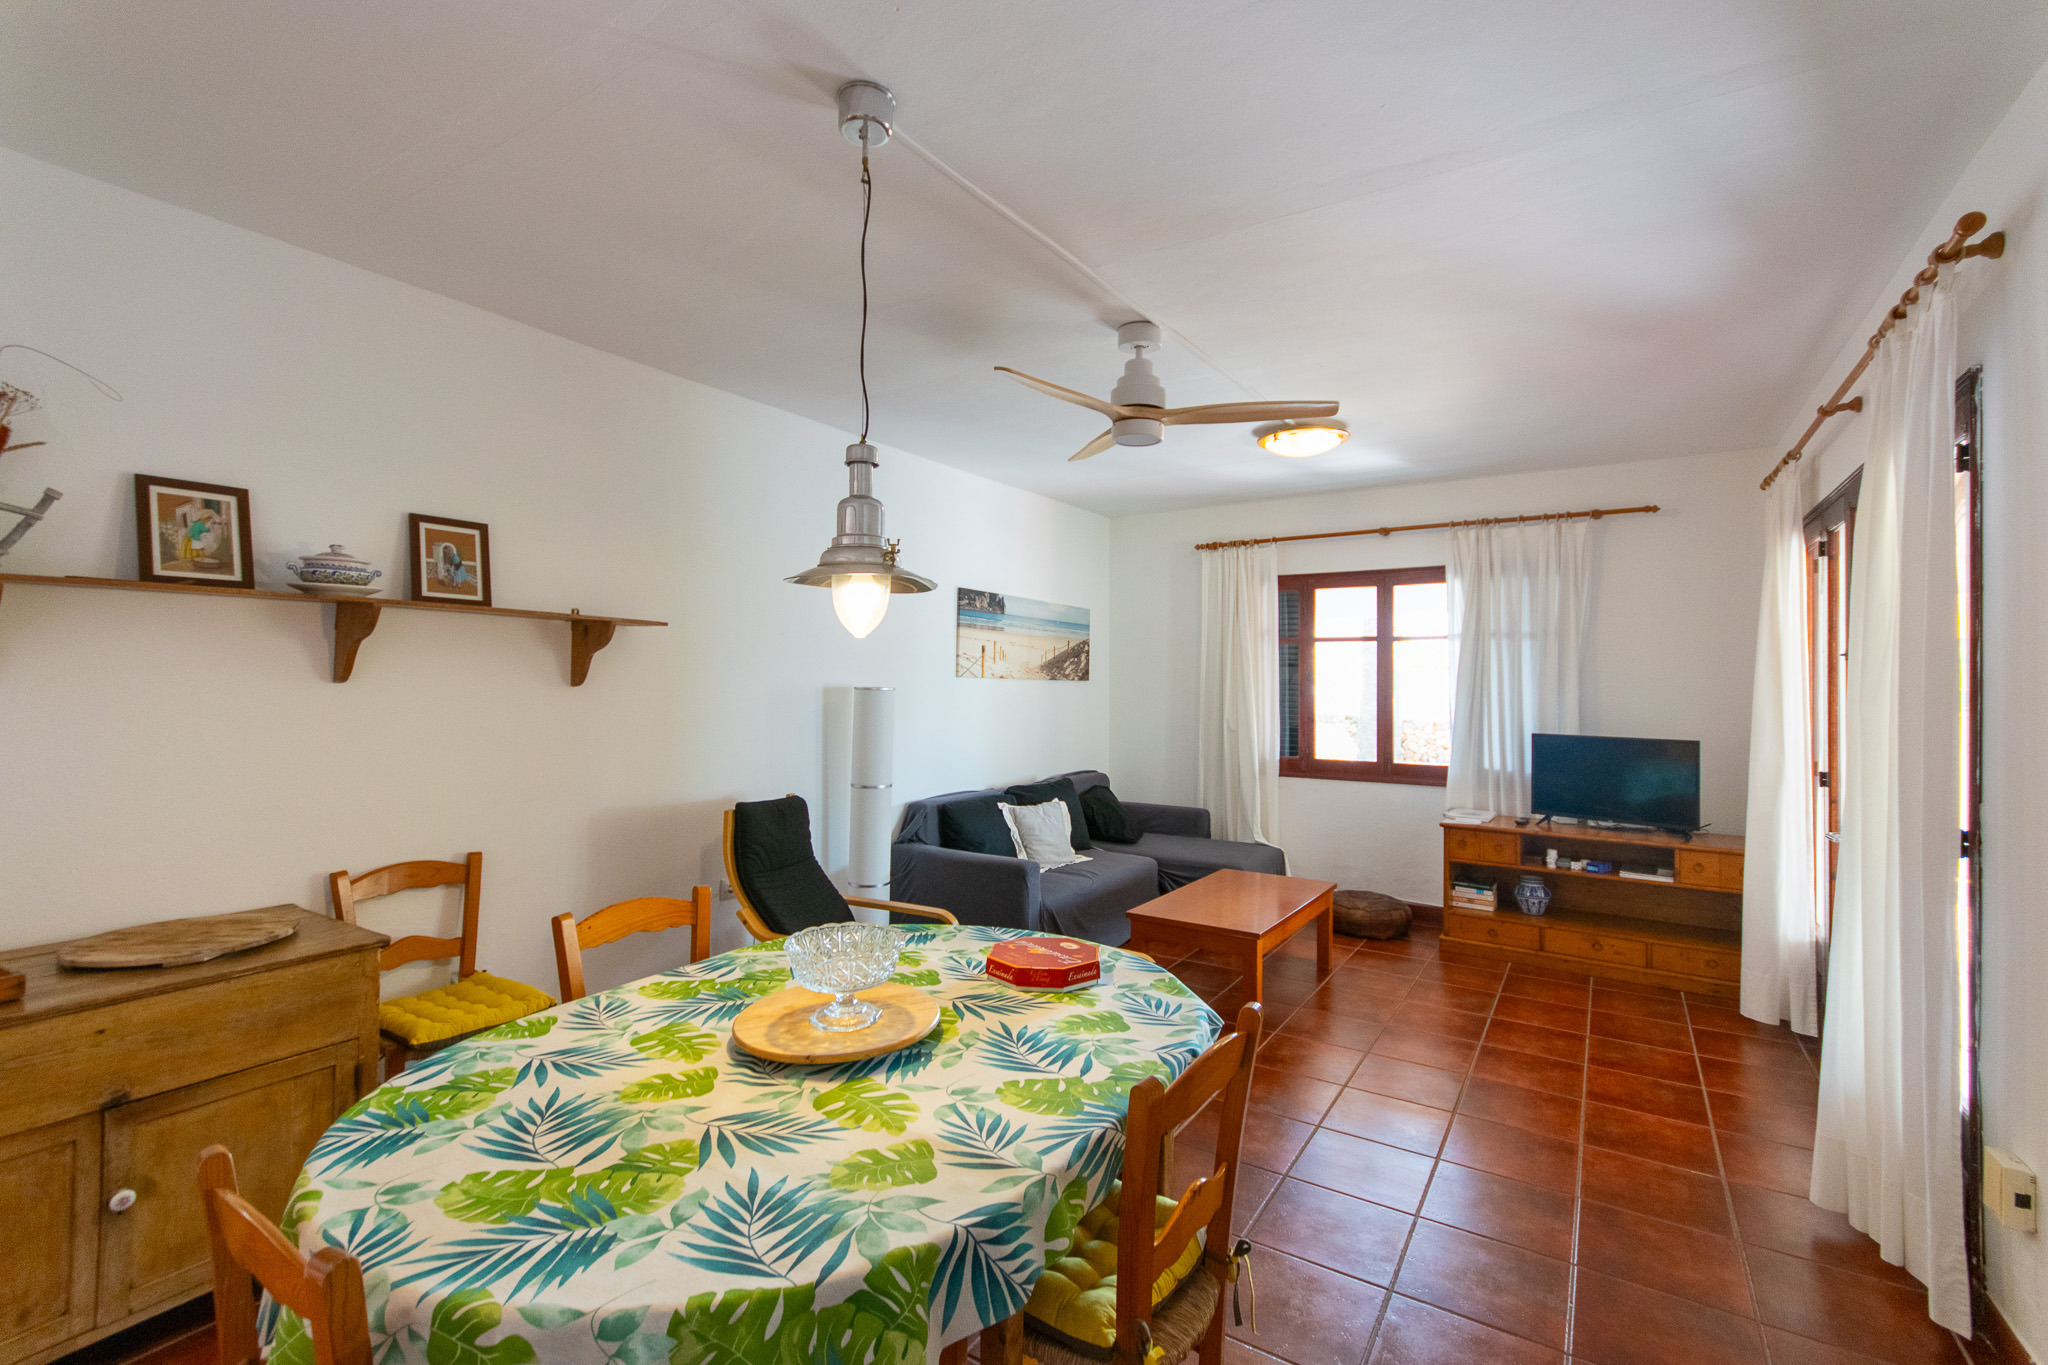 Living room of a villa with tourist license for sale in Cala n Bosch